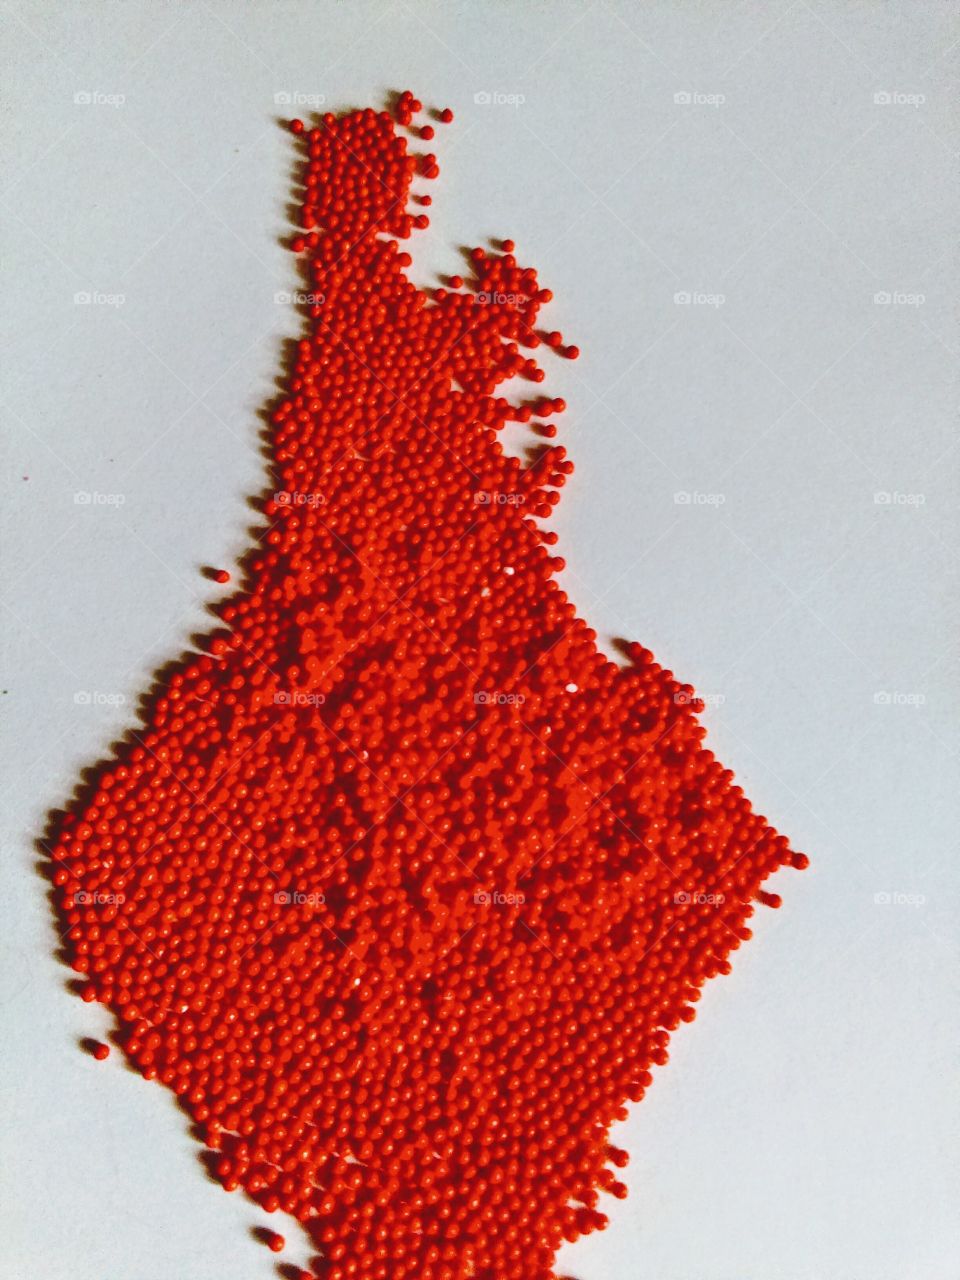 Little Red beads